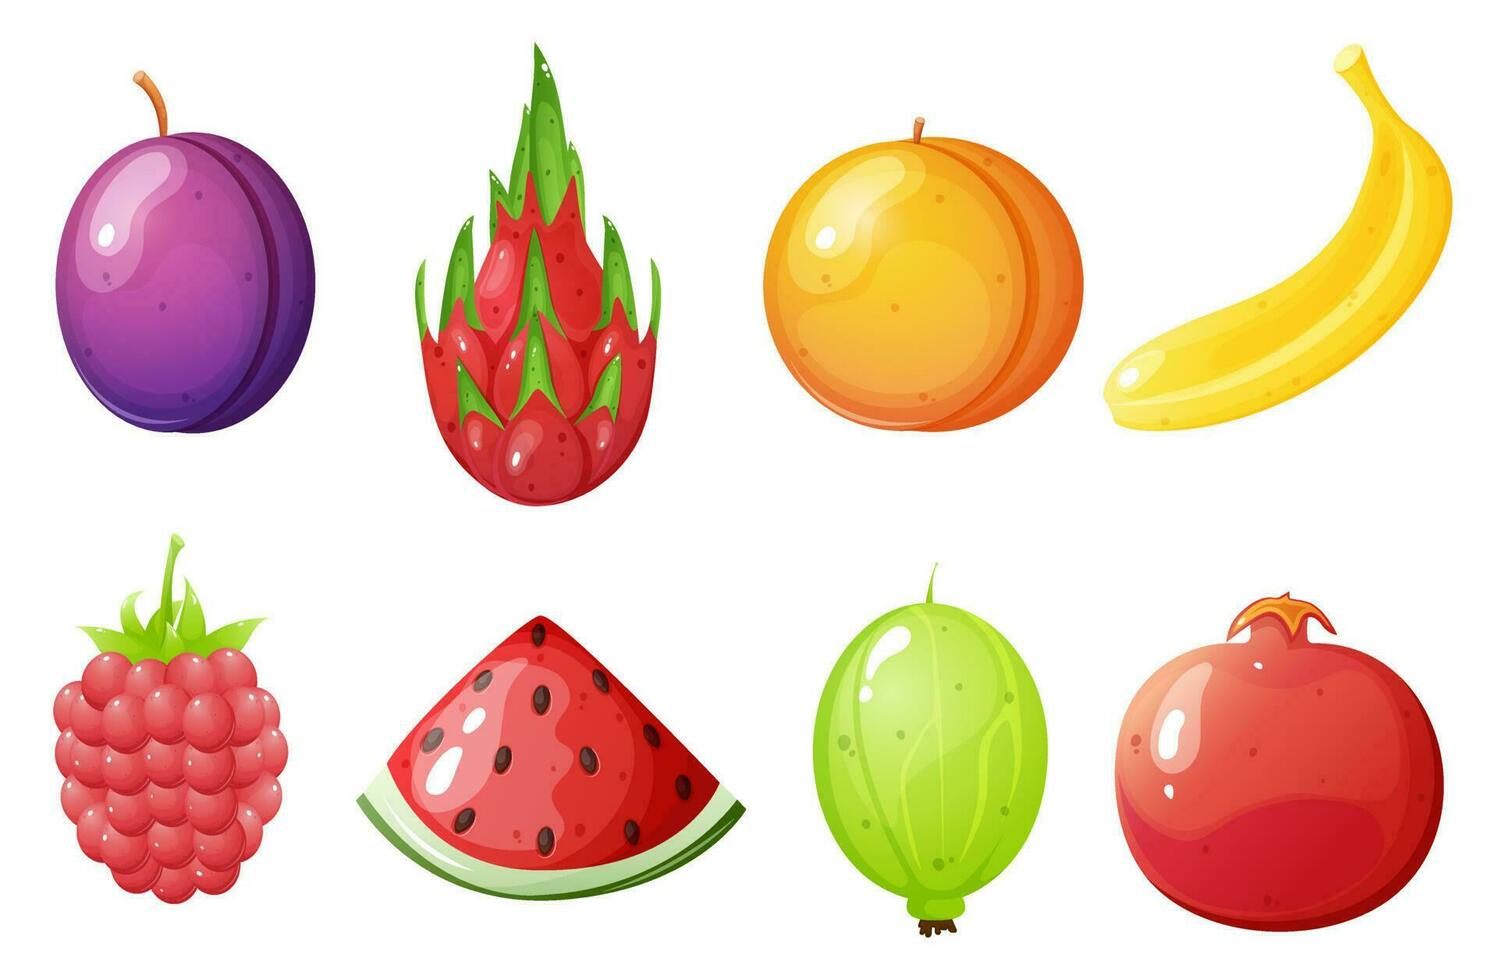 Fruits and berries cartoon illustration set isolated on white background. vector